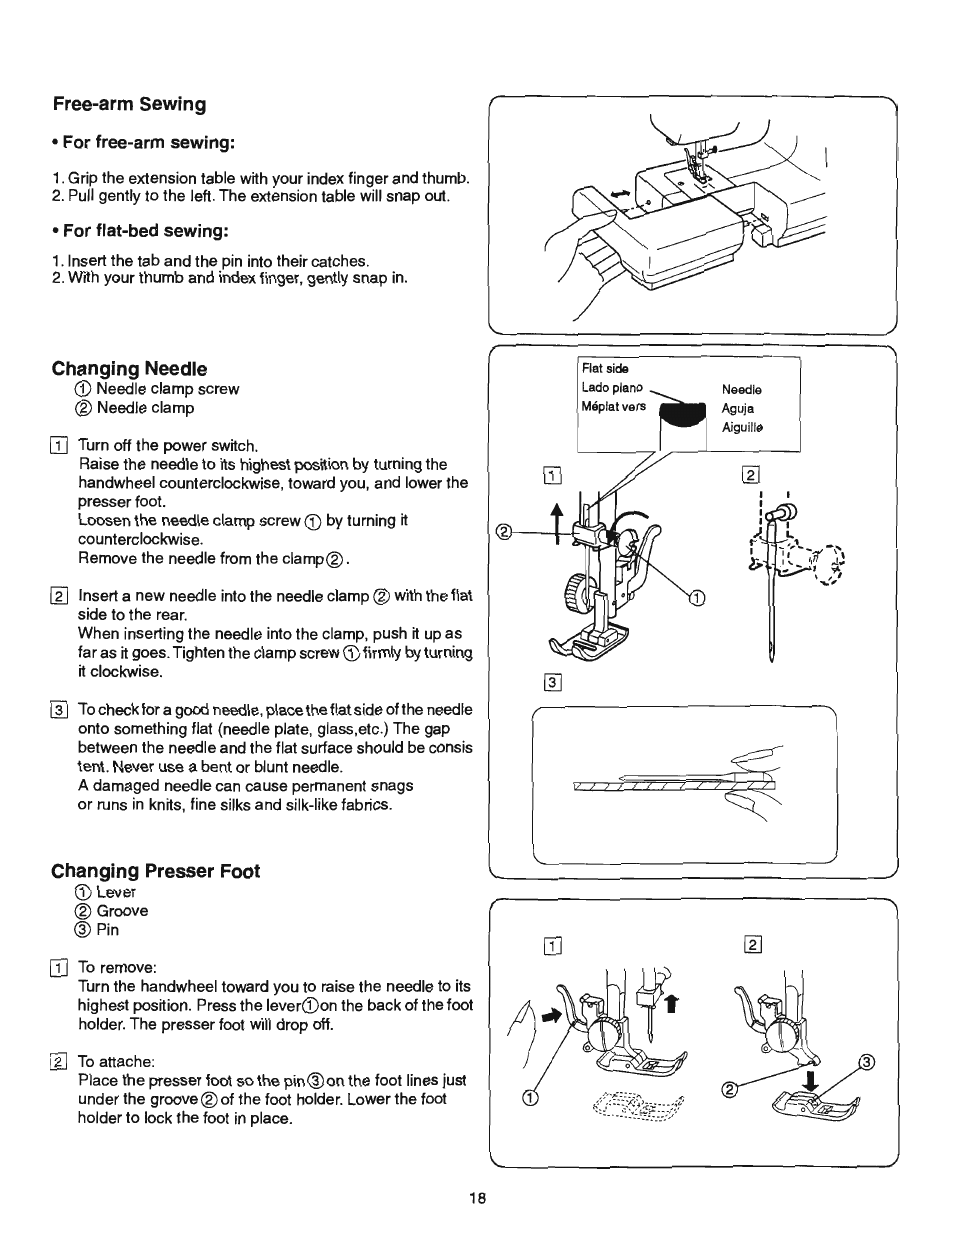 Free-arm sewing, Changing needle, Changing presser foot | Changing needle changing presser foot | SINGER 384.13012 (Sold at Sears) User Manual | Page 18 / 79